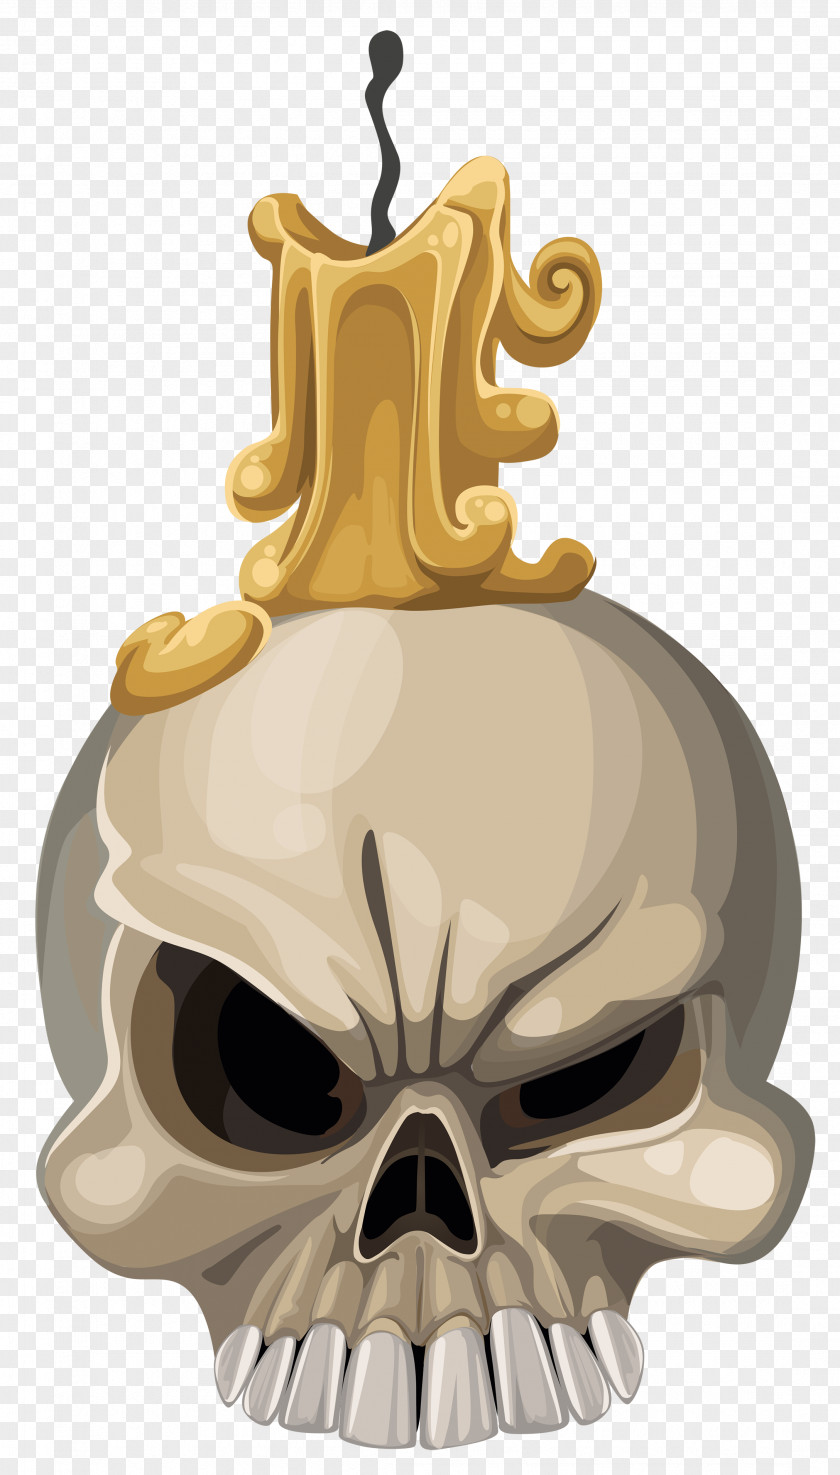 Halloween Skull With Candle PNG Clipart Image Jack-o'-lantern Clip Art PNG